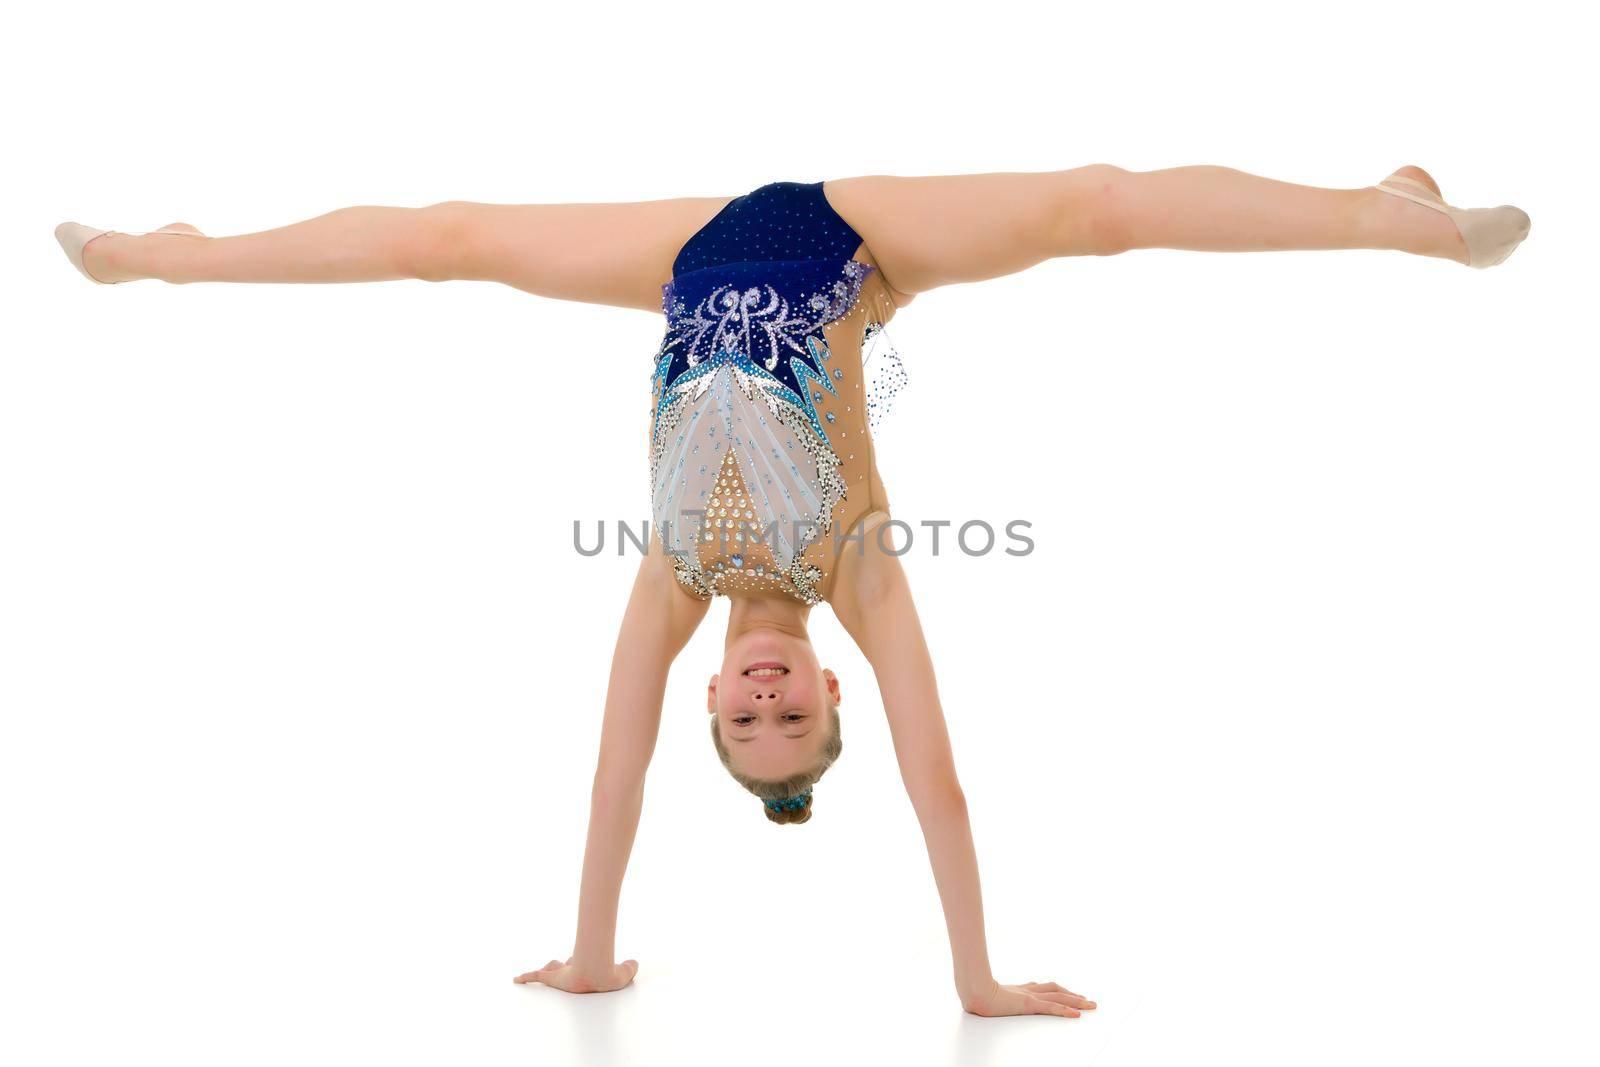 A slender girl gymnast, in a beautiful gymnastic leotard for competitions, performs a handstand. Concept for kids sport competition. isolated on a white background.